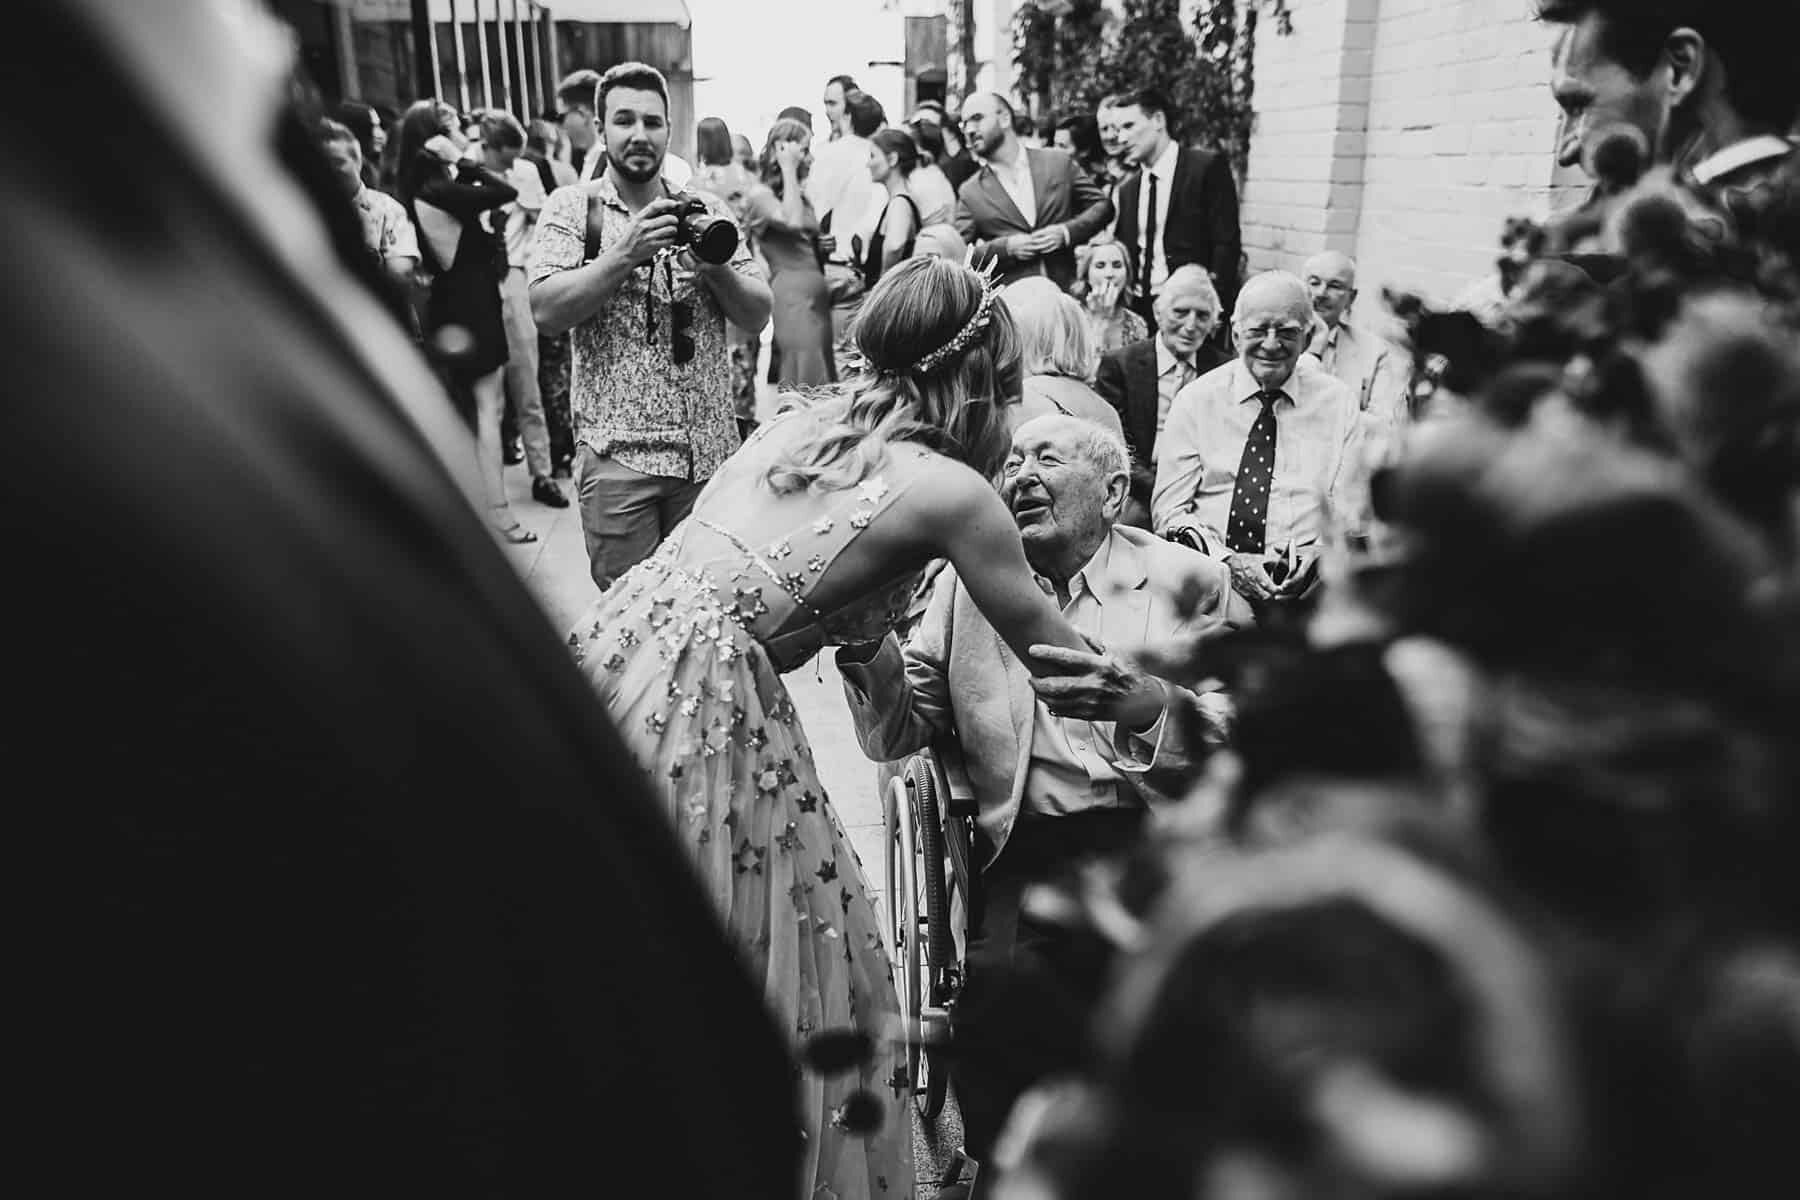 vibrant Fremantle wedding at Guildhall / Photography by Adam Levi Brown